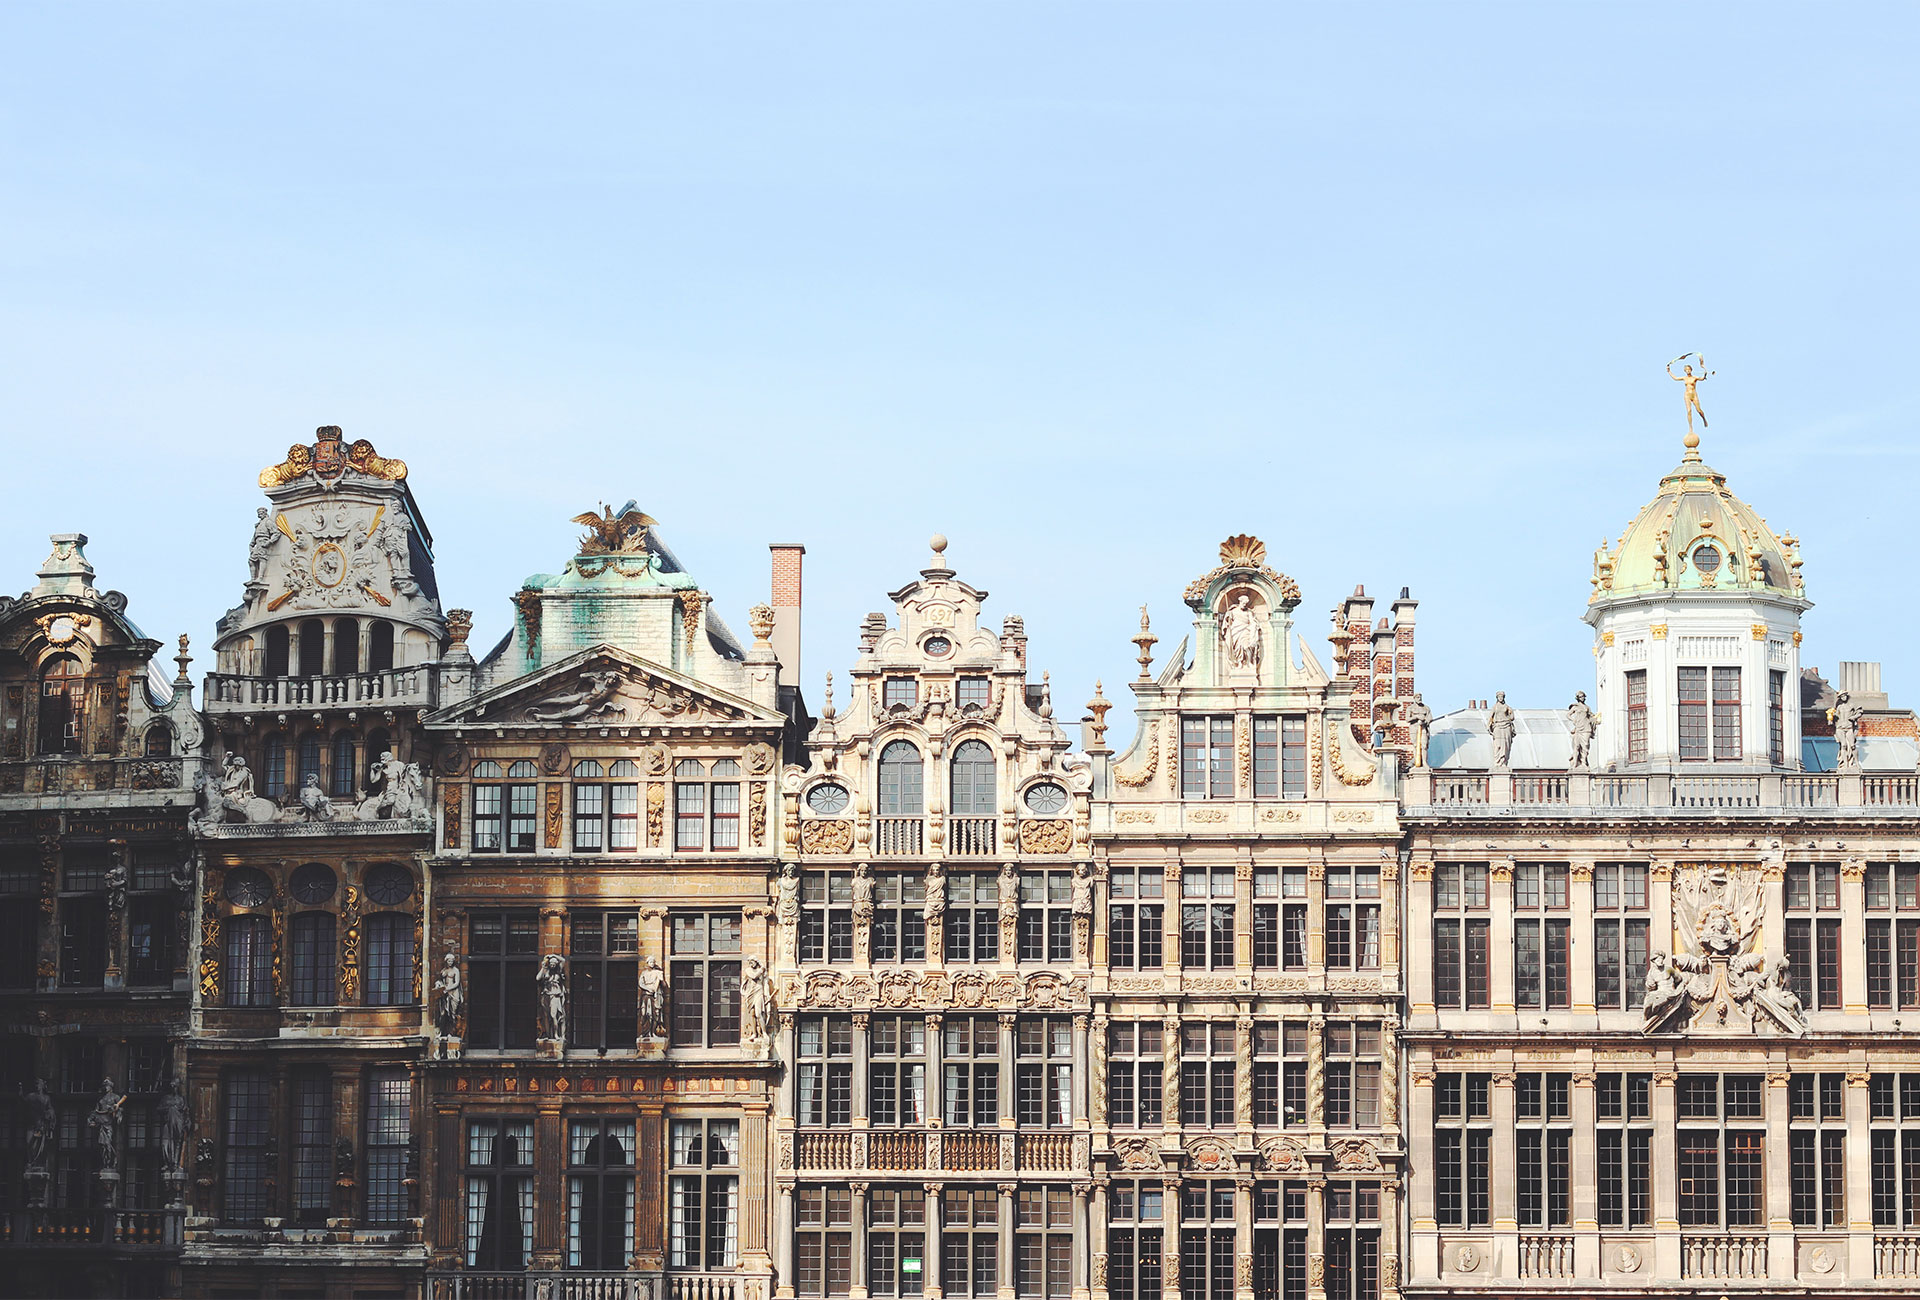 5 TIPS (plus one) FOR A DESIGN TRIP TO BRUSSELS